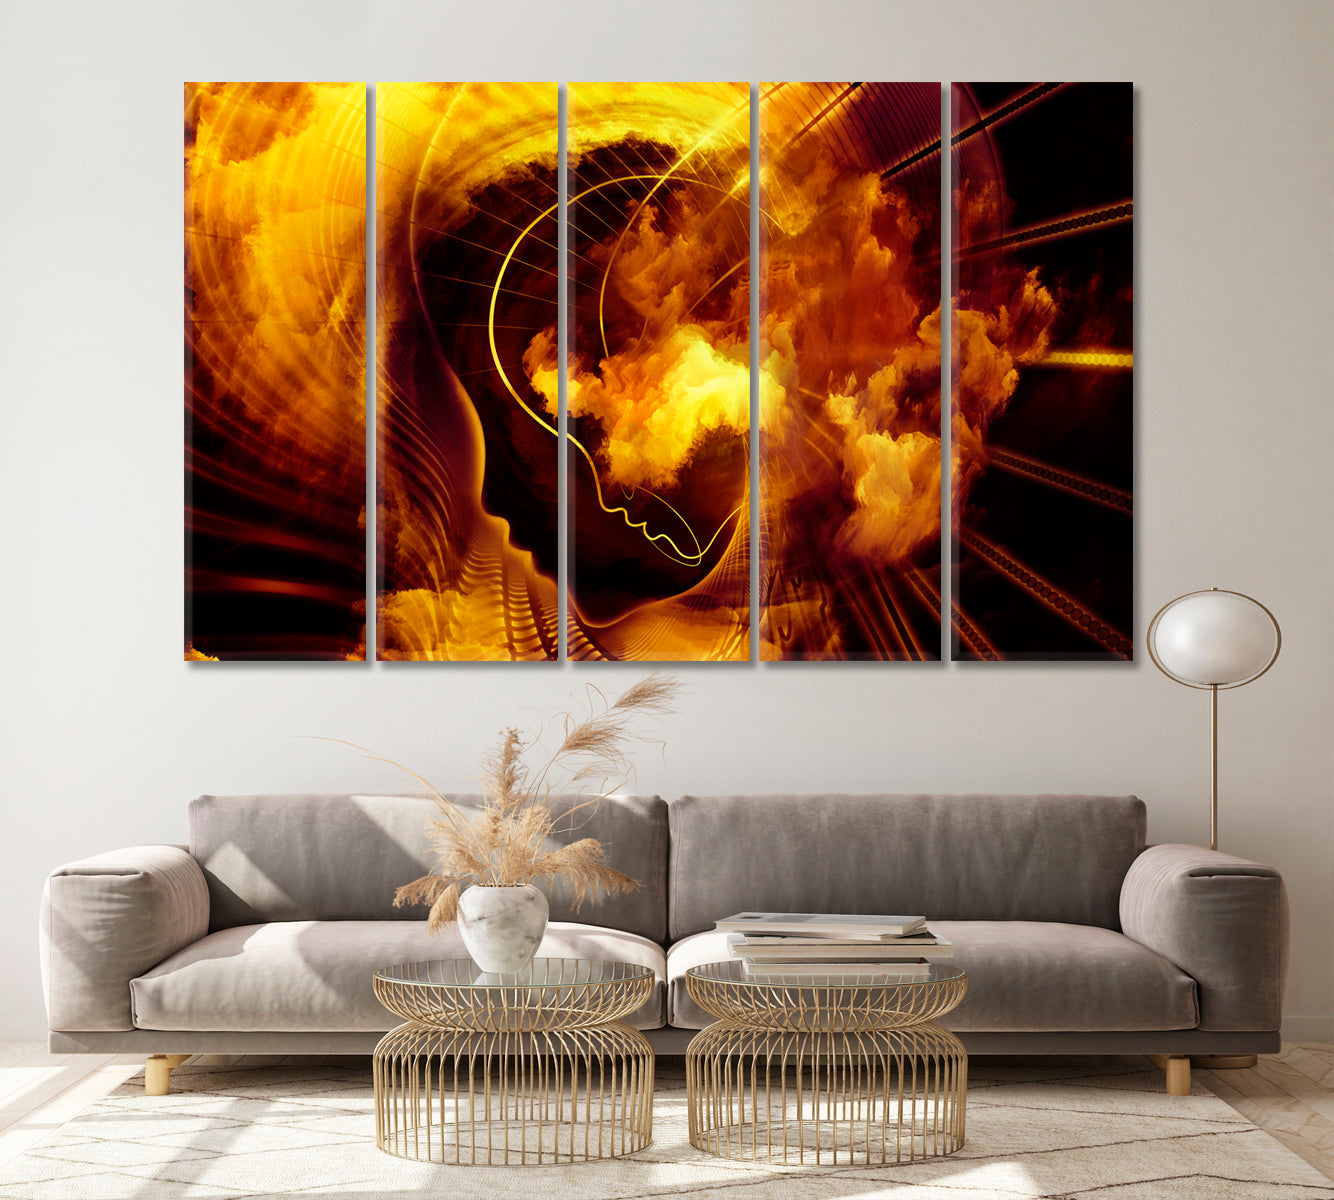 Abstract Fractal Forms Imagination Consciousness Art Artesty 5 panels 36" x 24" 